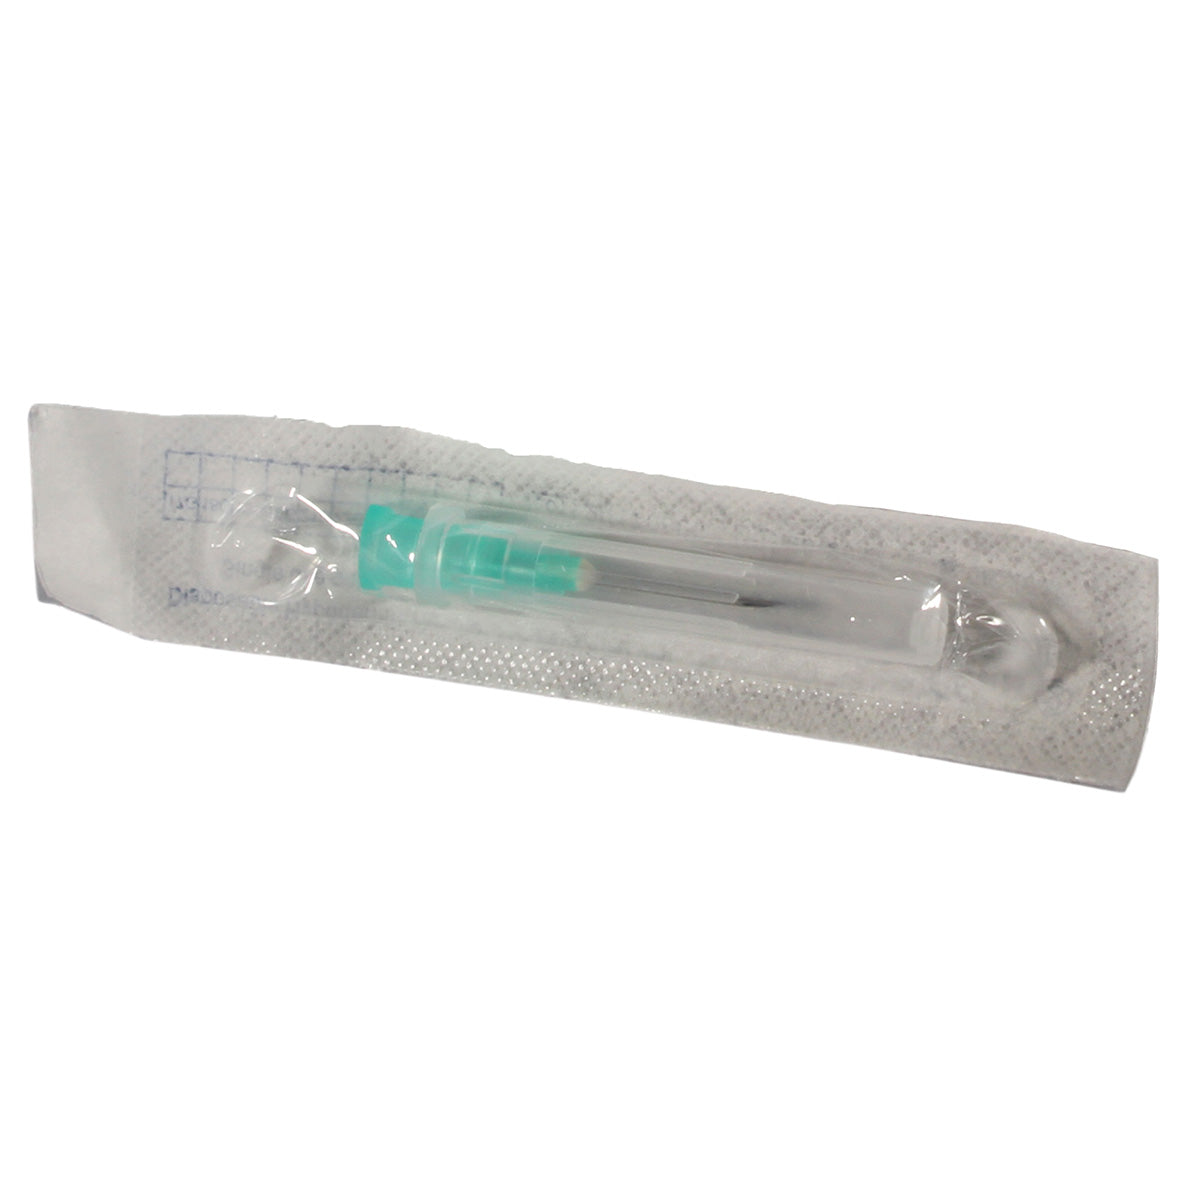 Agrihealth Agriject Poly Hub Disposable Needles